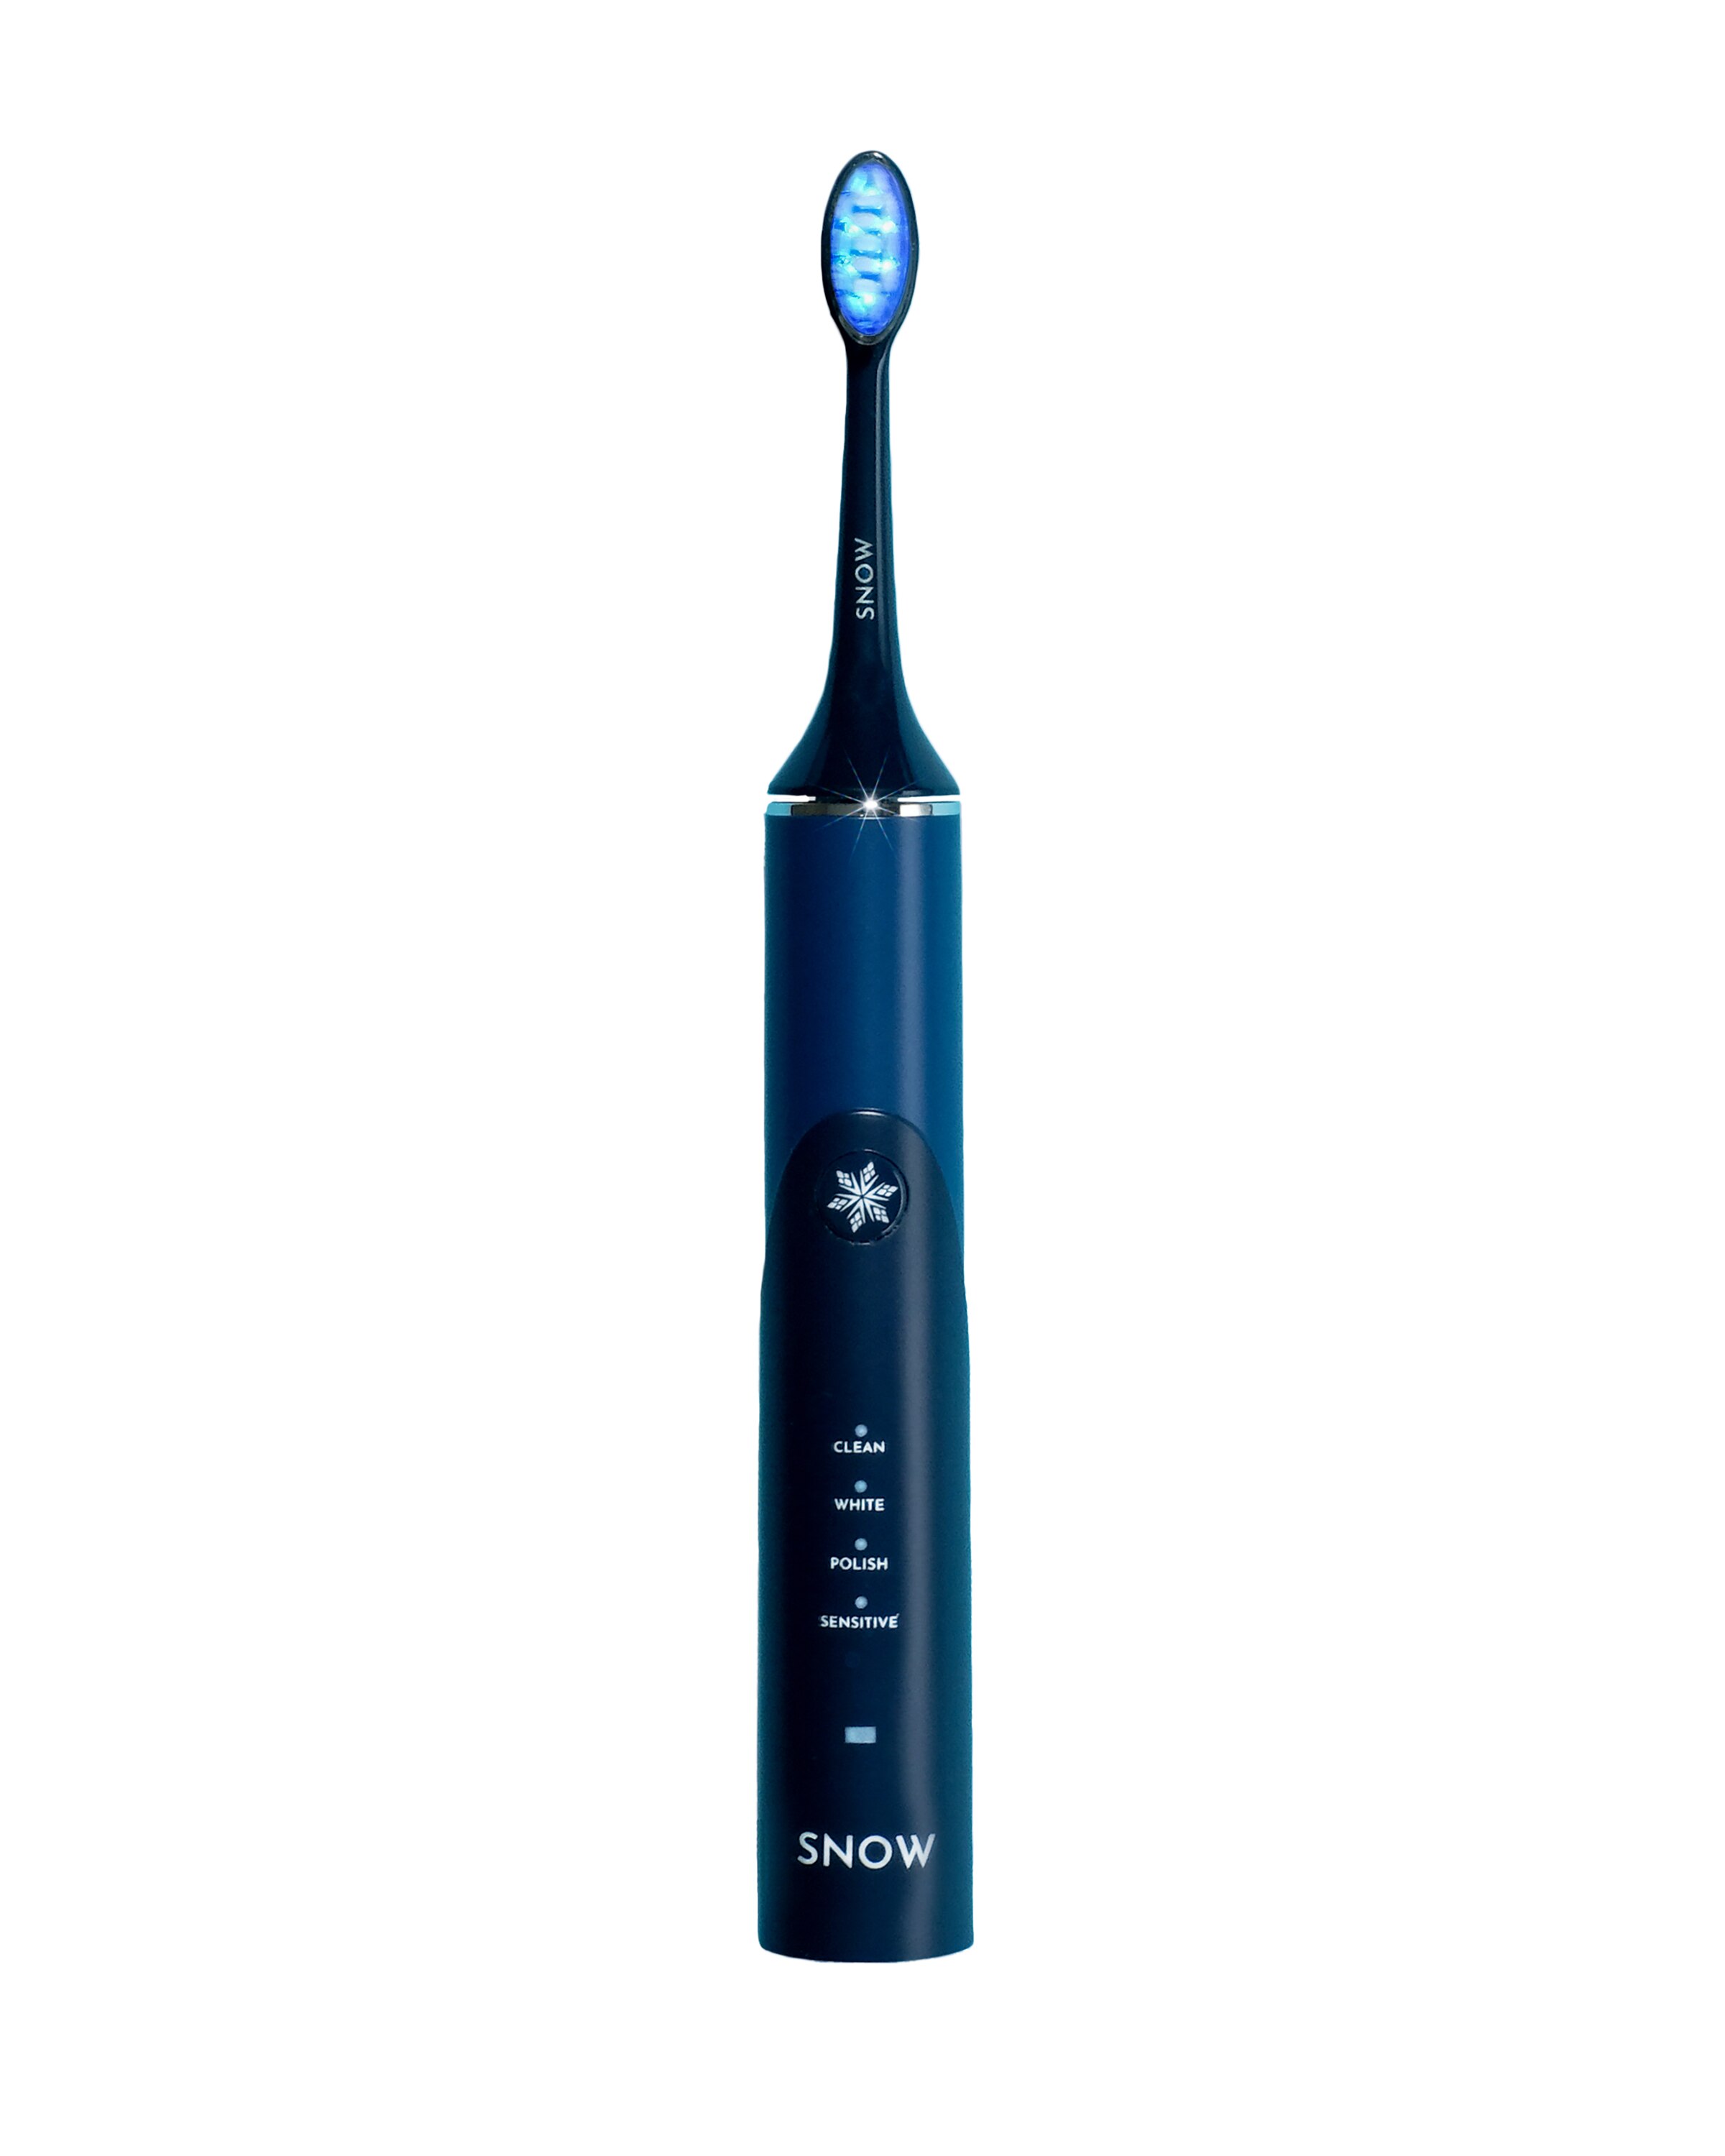 SNOW LED Electric Toothbrush